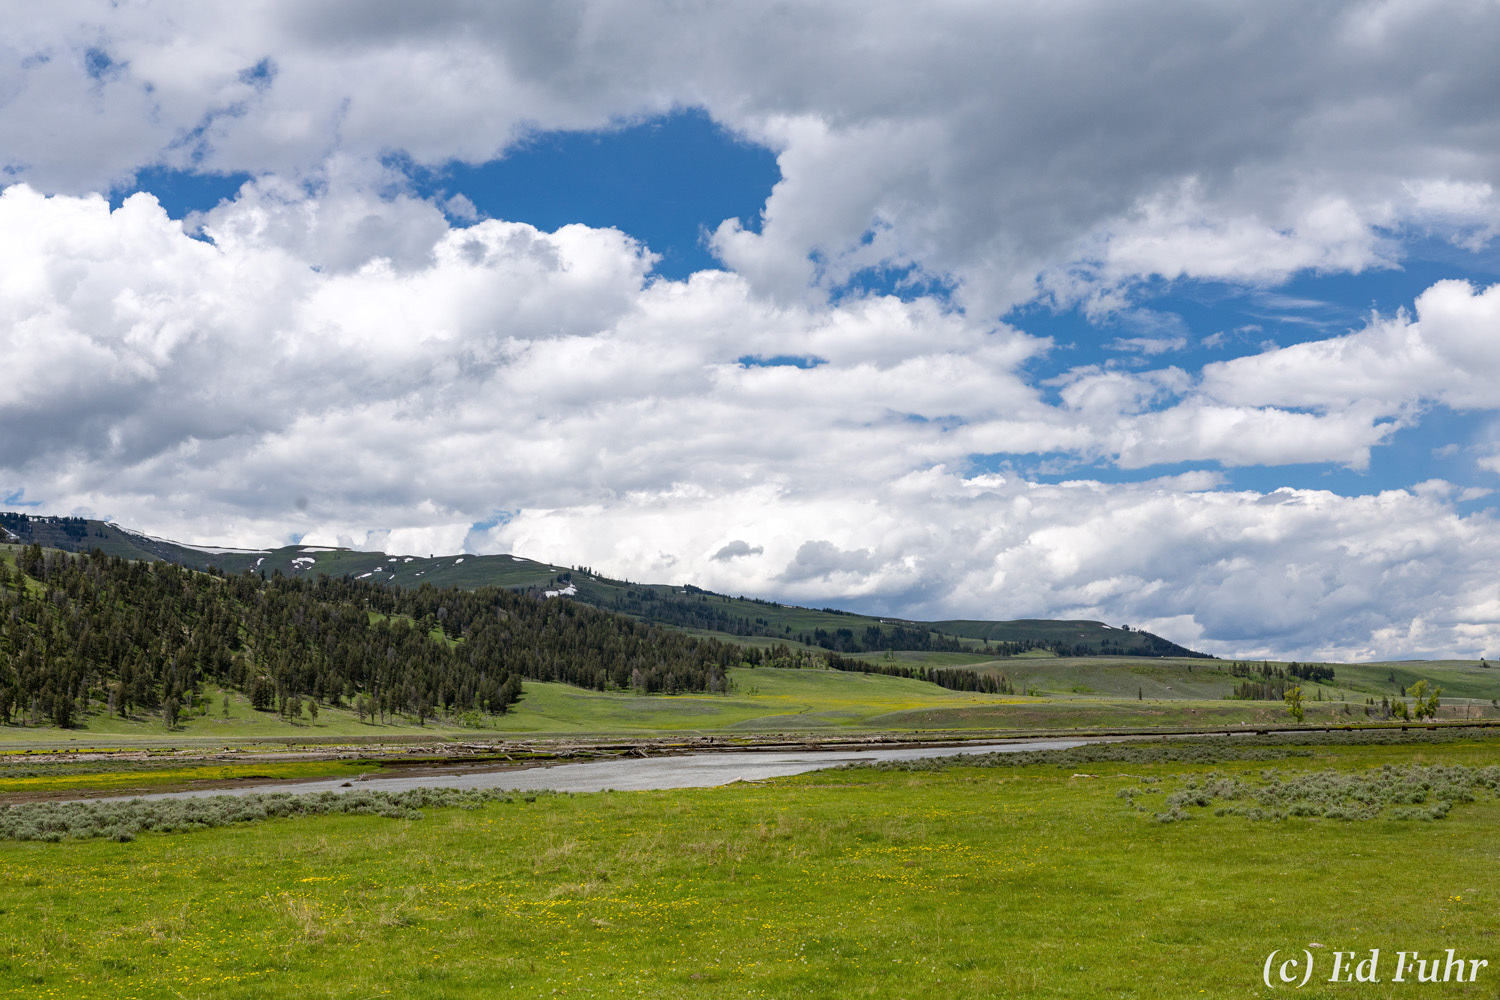 It is hard to describe the immense scope, sweep and sensation that is the Lamar Valley, especially in spring when everything...